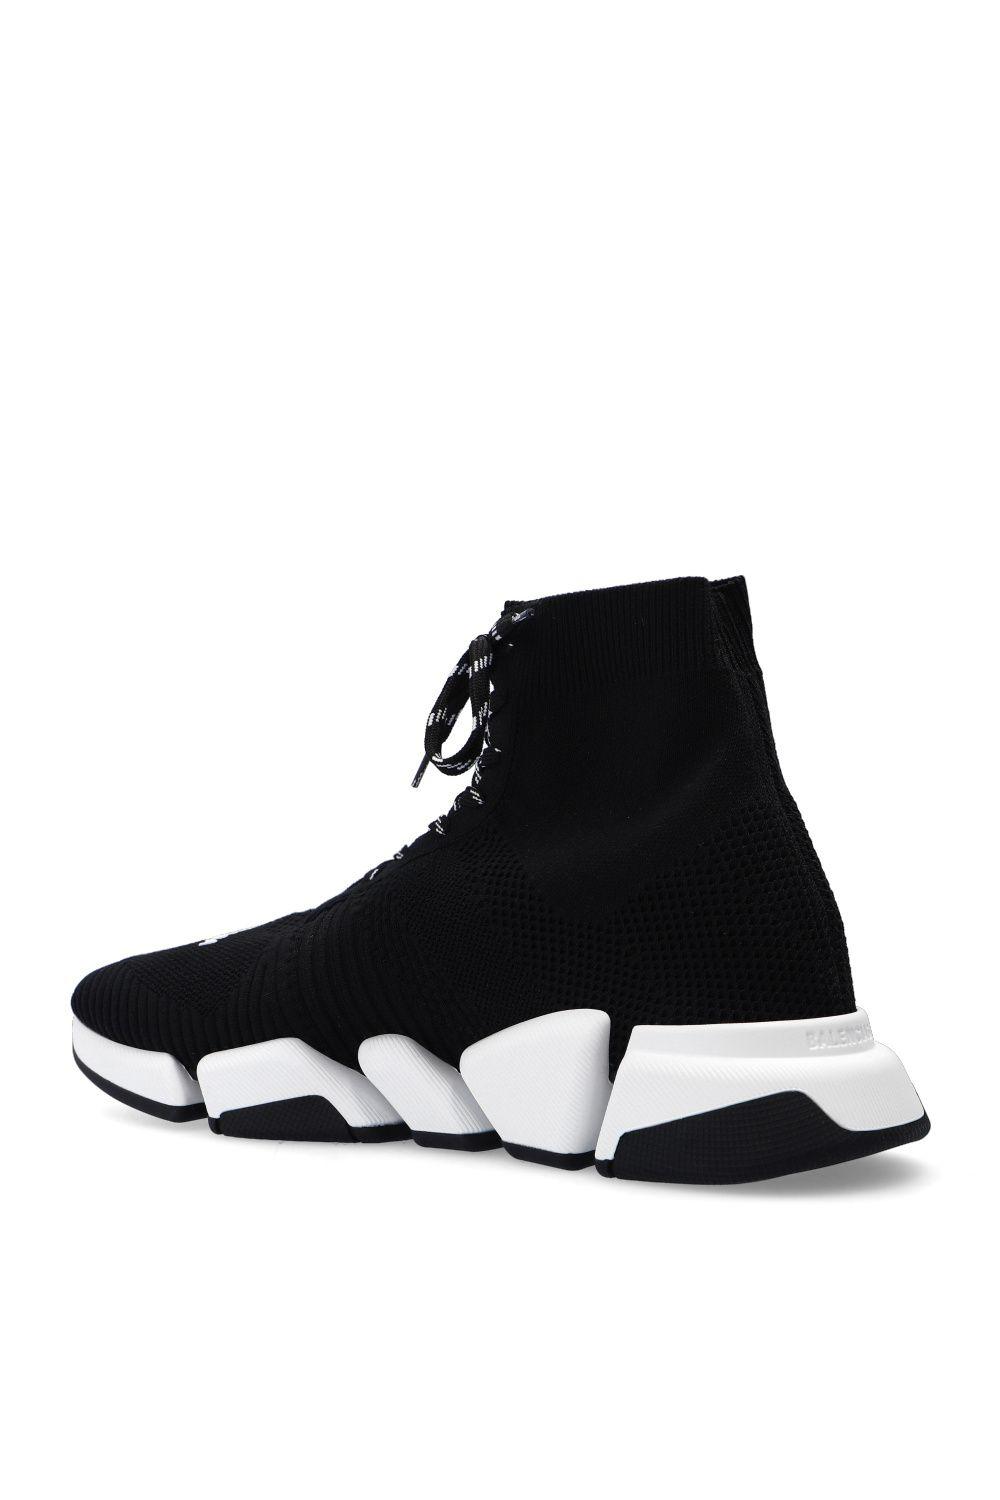 Balenciaga 'speed 2.0 Lace Up' Sneakers in Black for Men | Lyst